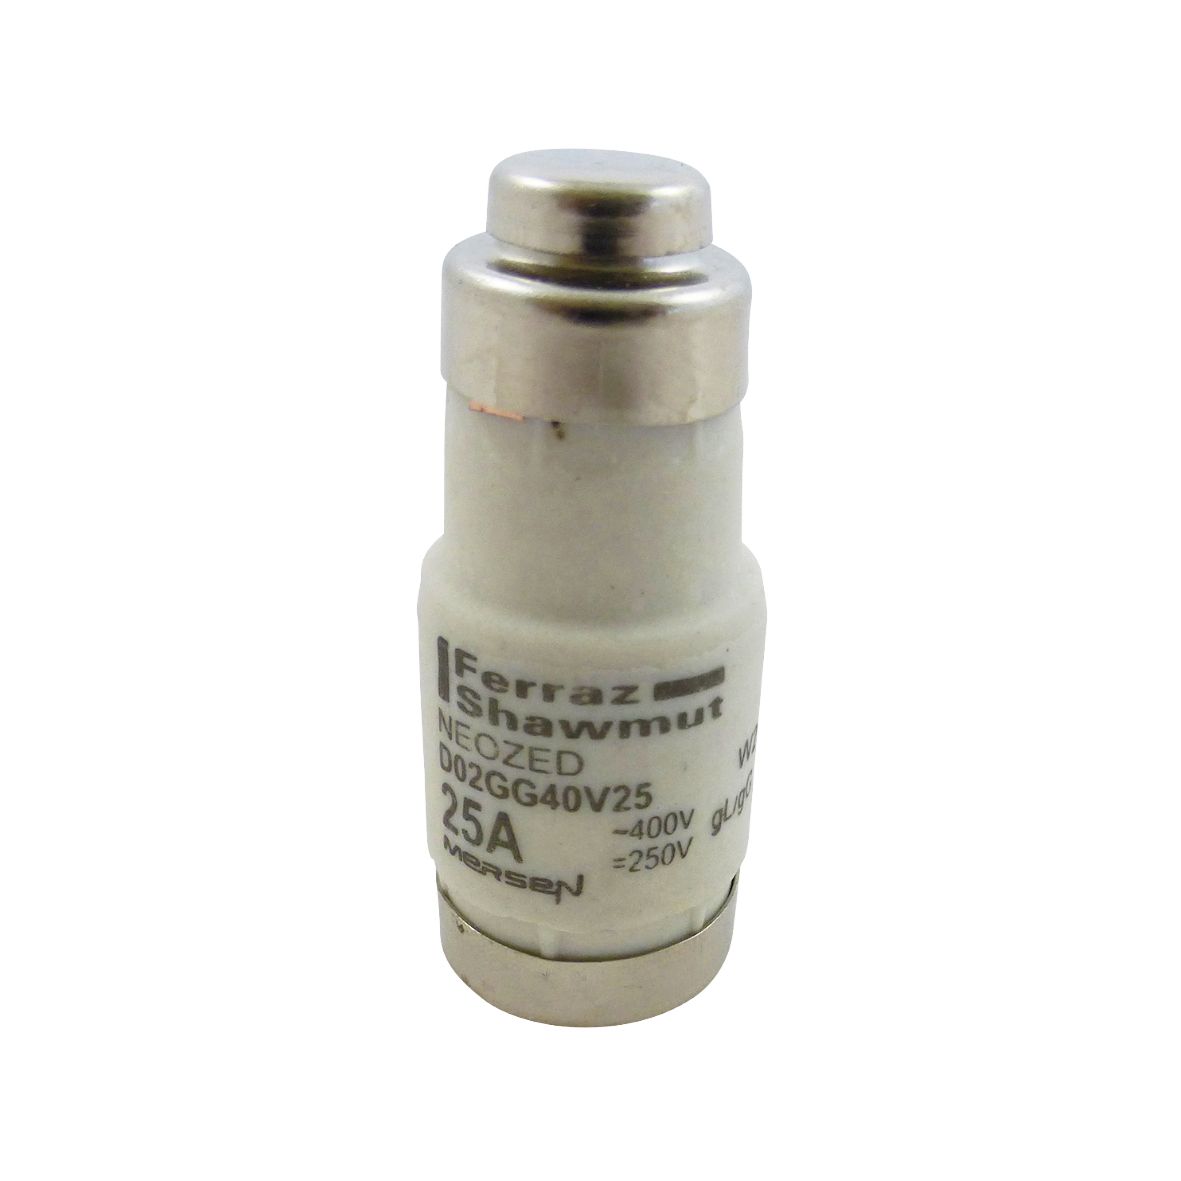 W213160 - Neozed D0 fuse-link gG, 400VAC, D02, 25A, yellow